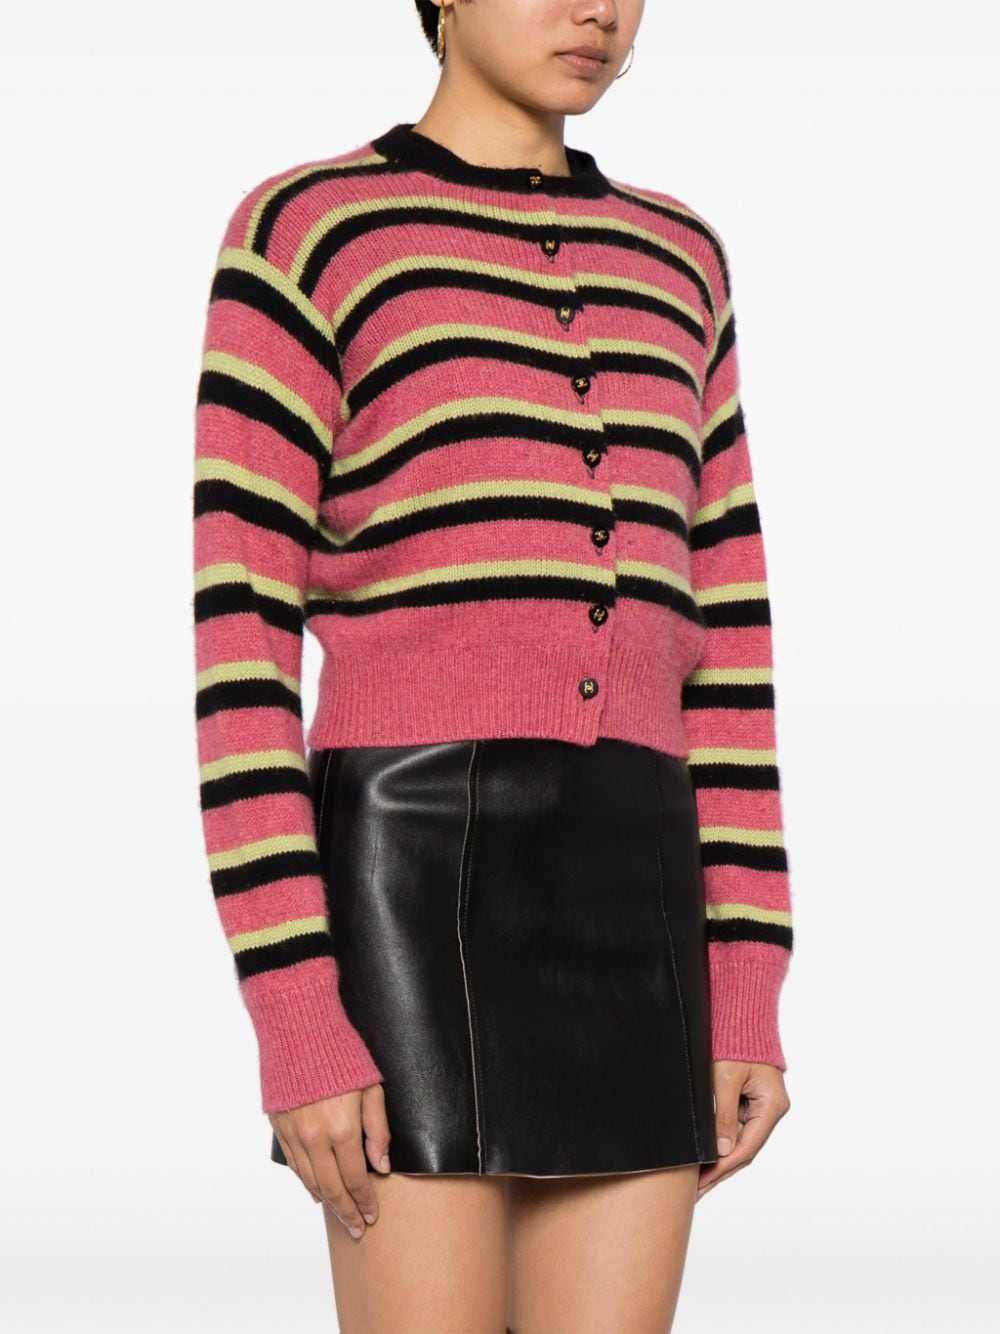 CHANEL Pre-Owned 1996 striped cashmere cardigan s… - image 3